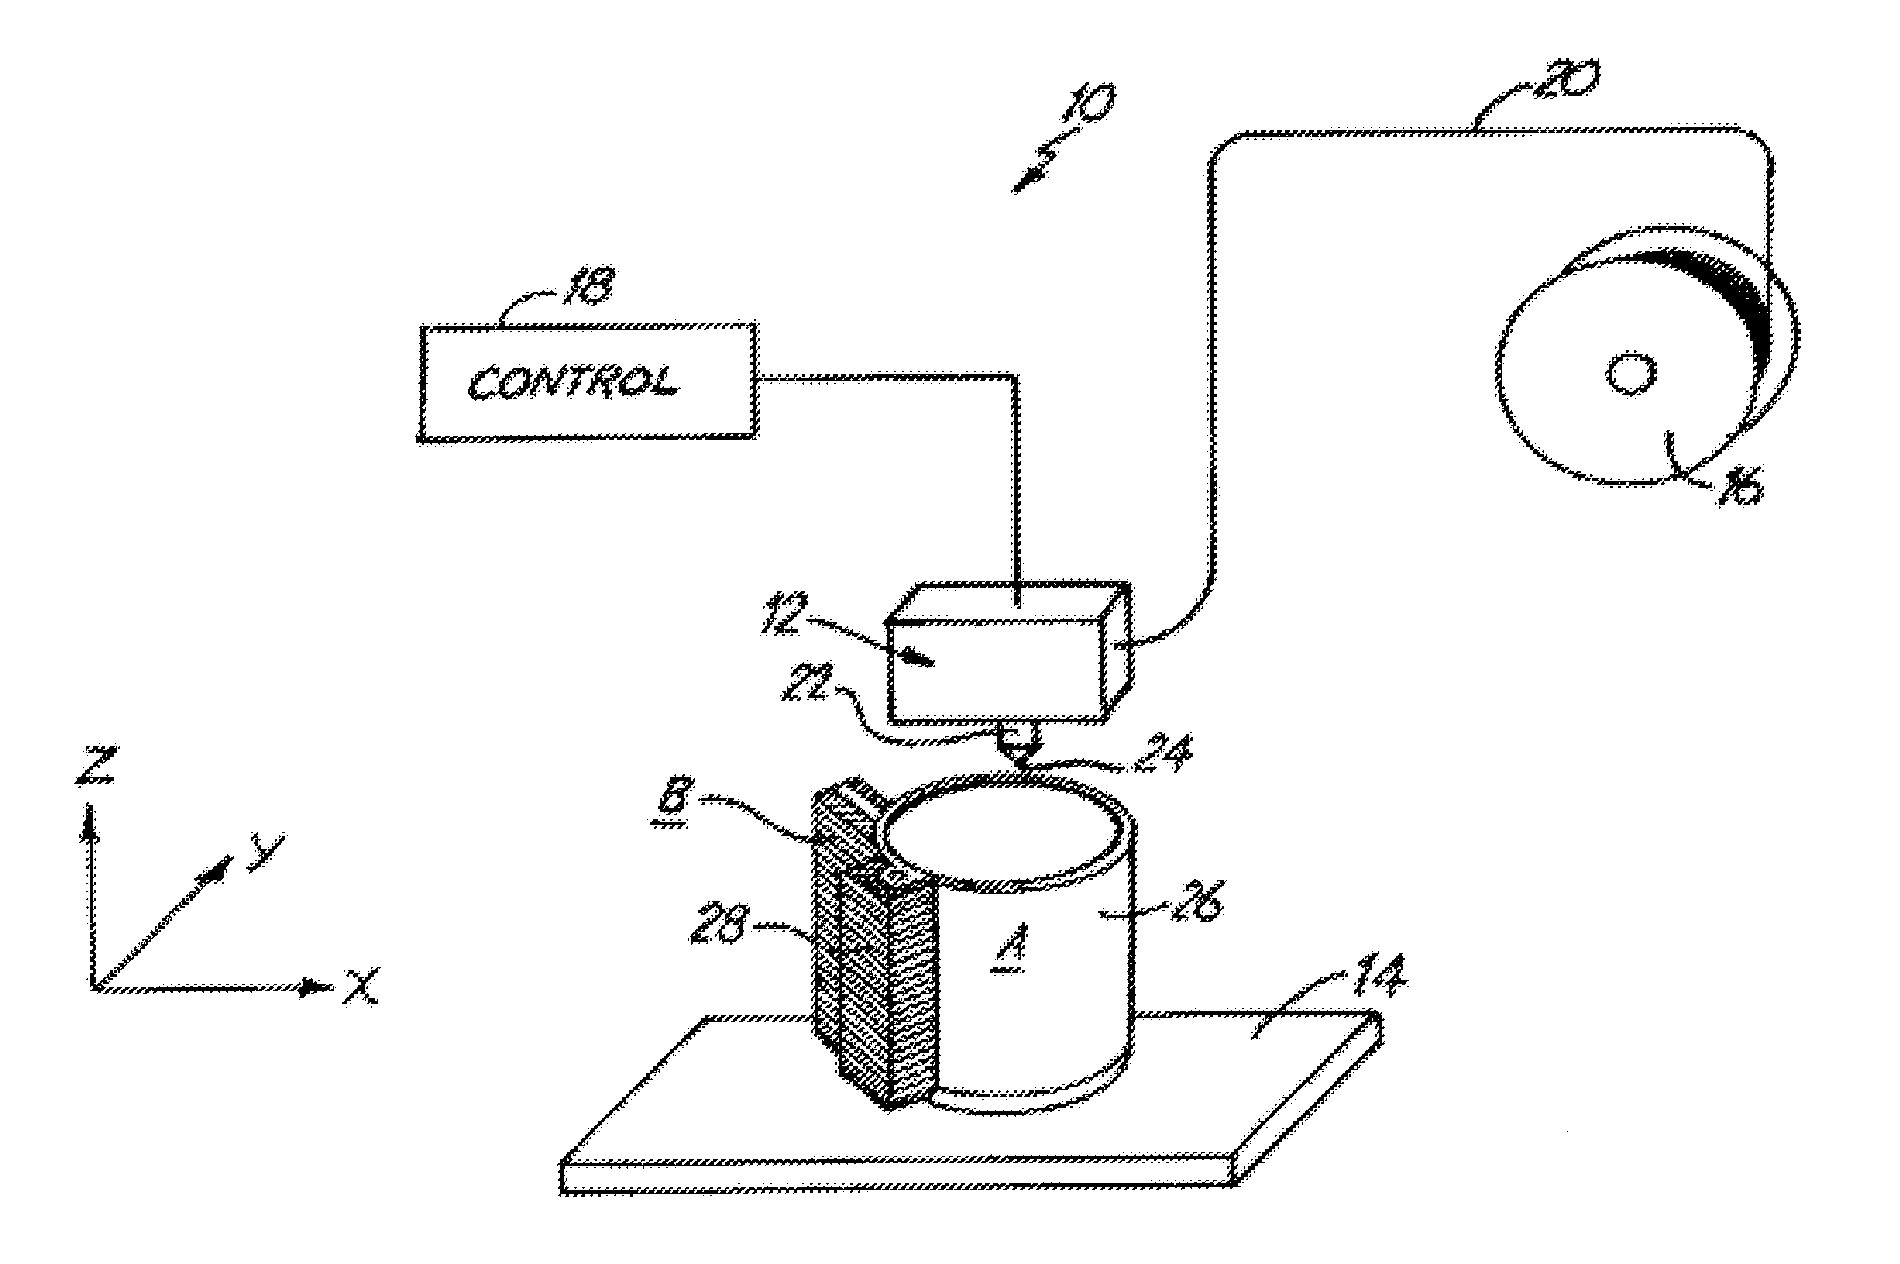 Use and provision of an amorphous vinyl alcohol polymer for forming a structure